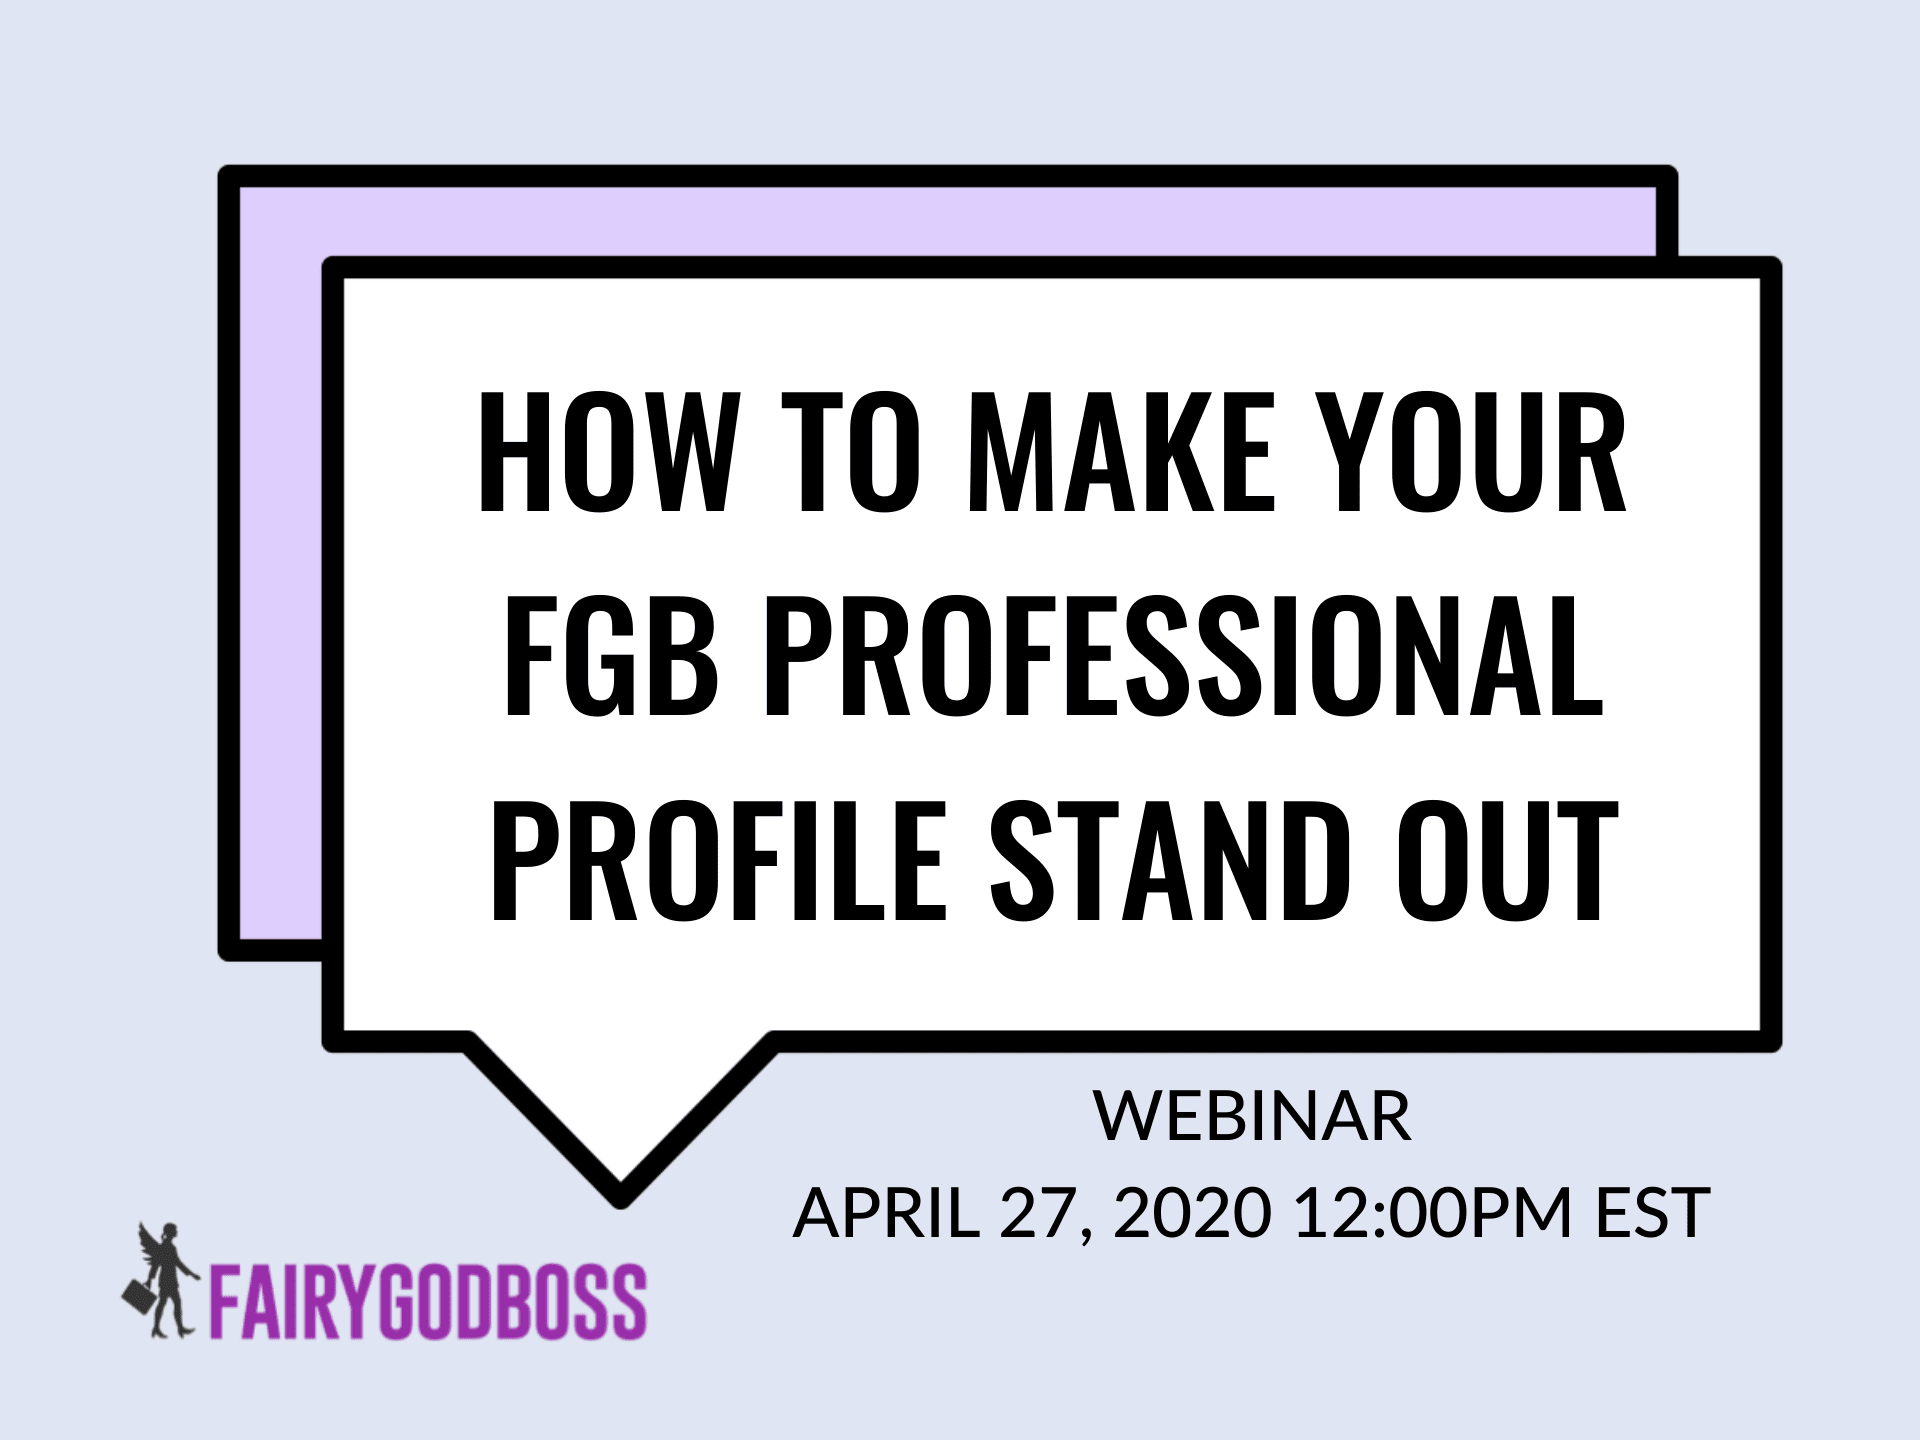 How To Make Your FGB Professional Profile Stand Out